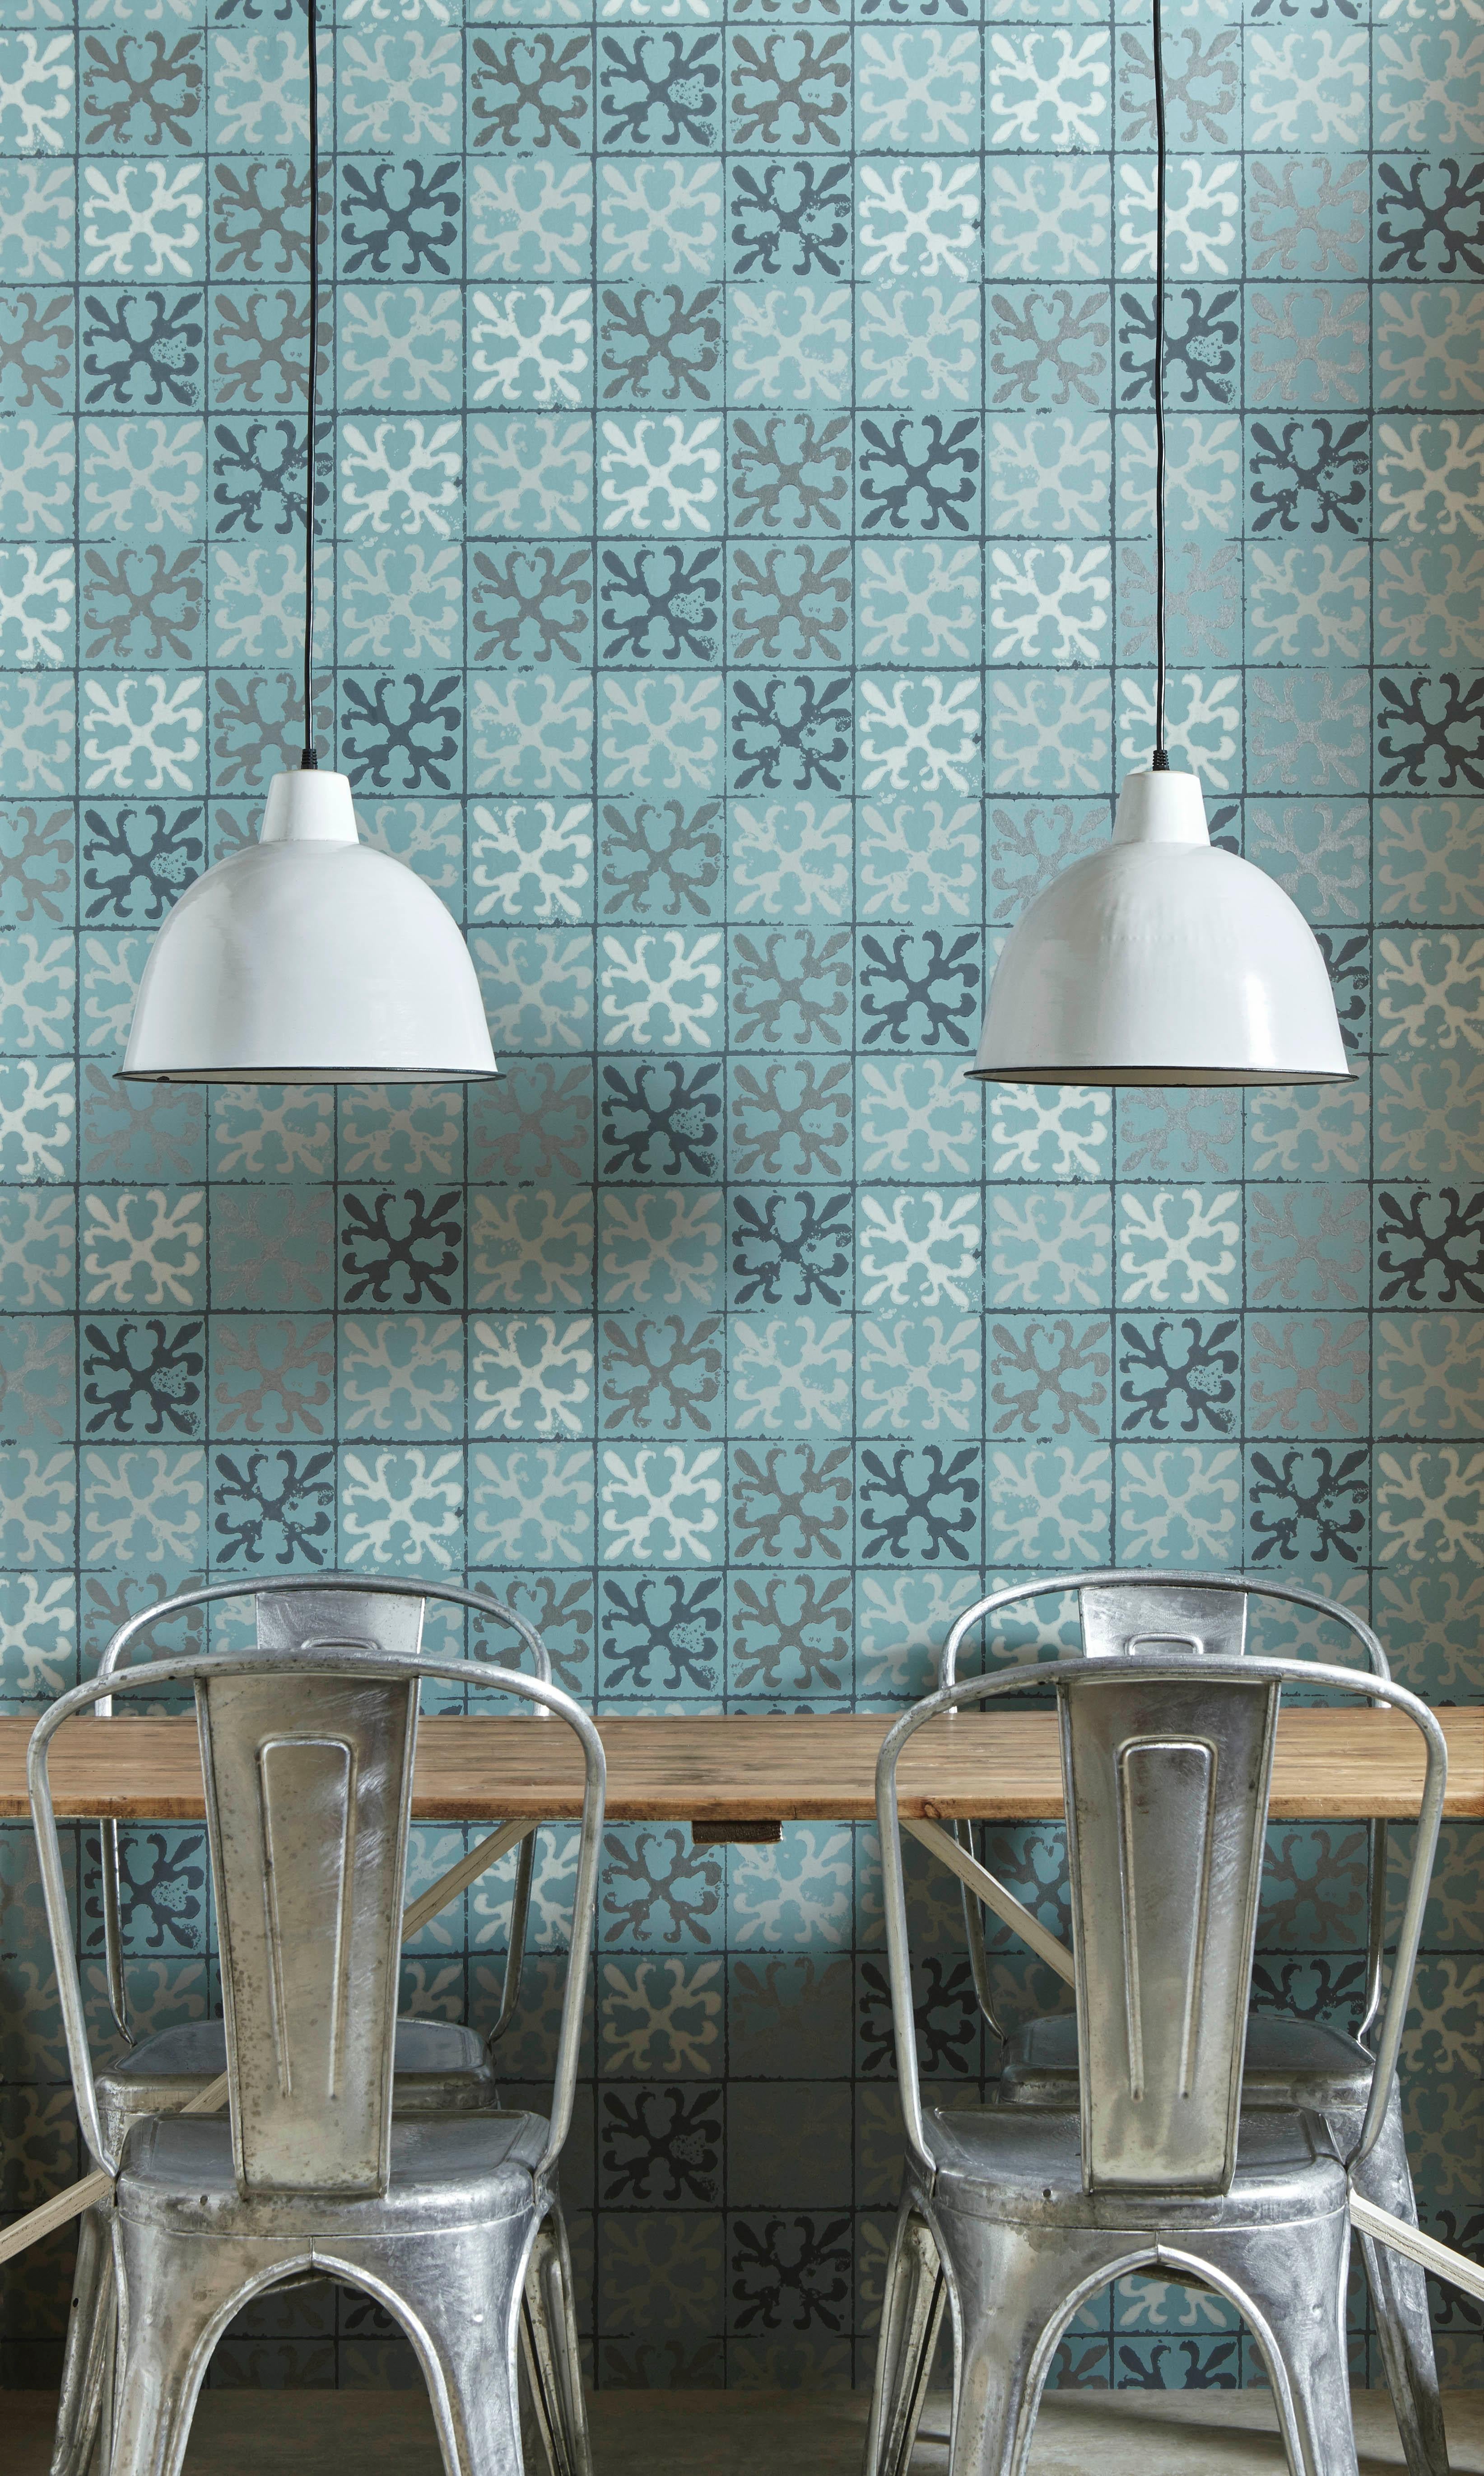 Colour: Canteen blue (also available in vintage grey)
Trim width: 52cm/20.5 inches
Roll length: 10m
Pattern repeat: Half drop
Match length: 52cm / 20.5 inches.

Please get in contact to order a sample.

A trompe l’oeil tile print with a bistro feel,